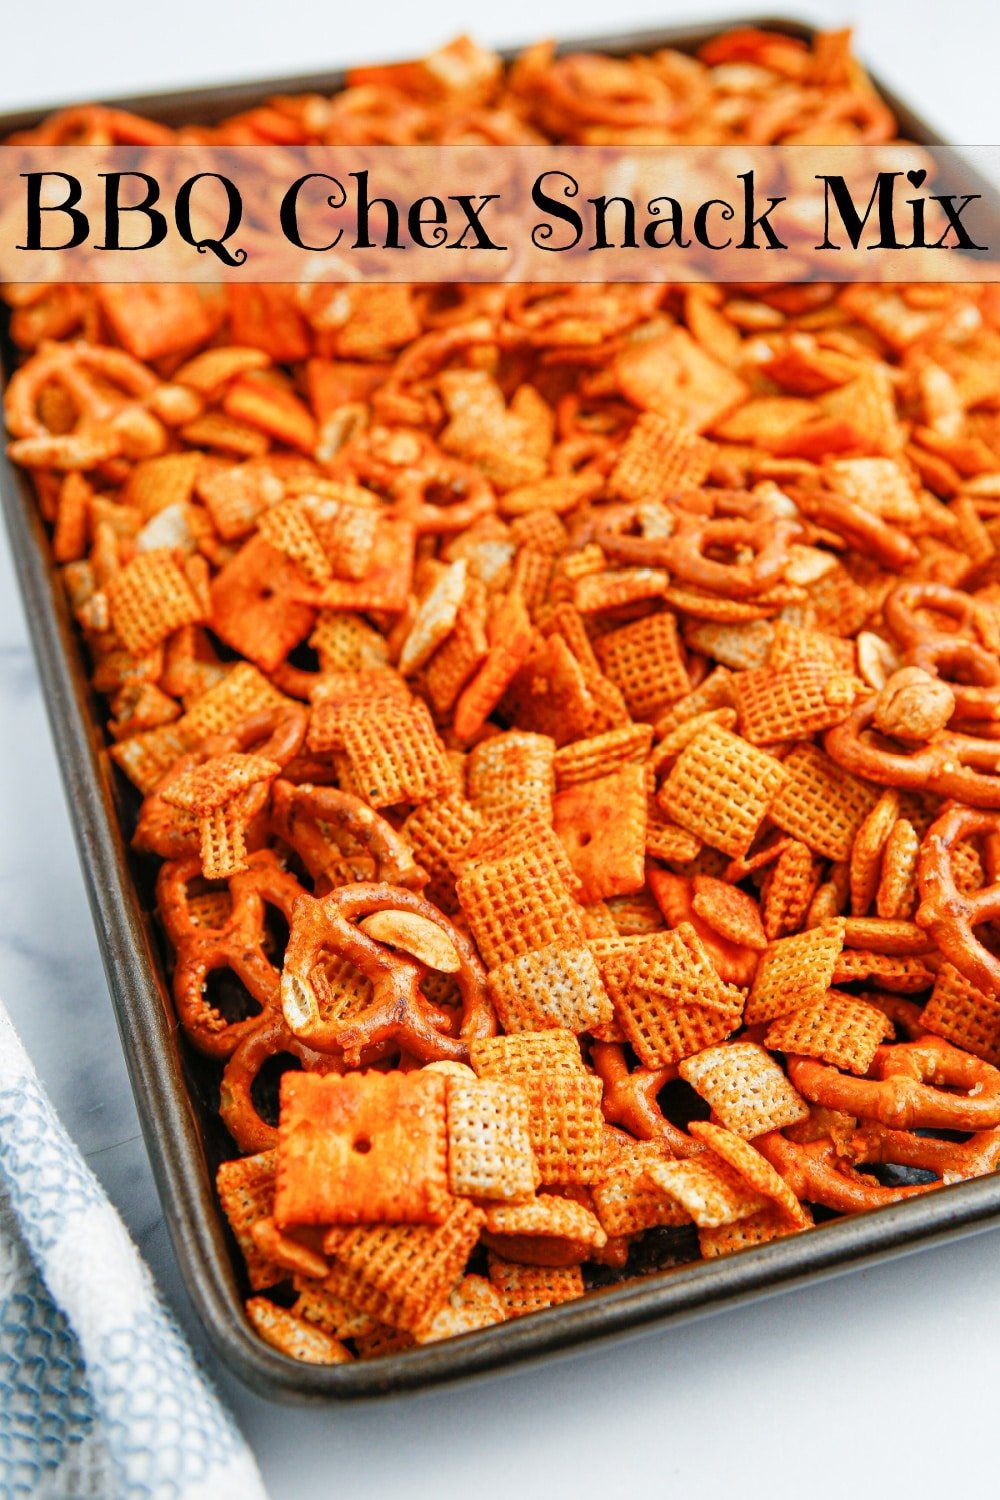 BBQ Chex Snack Mix is the ultimate bold Chex mix recipe. This crunchy snack is vibrant and versatile, with the right amount of spice and tang - the perfect ka-pow of flavor all at once. via @cmpollak1